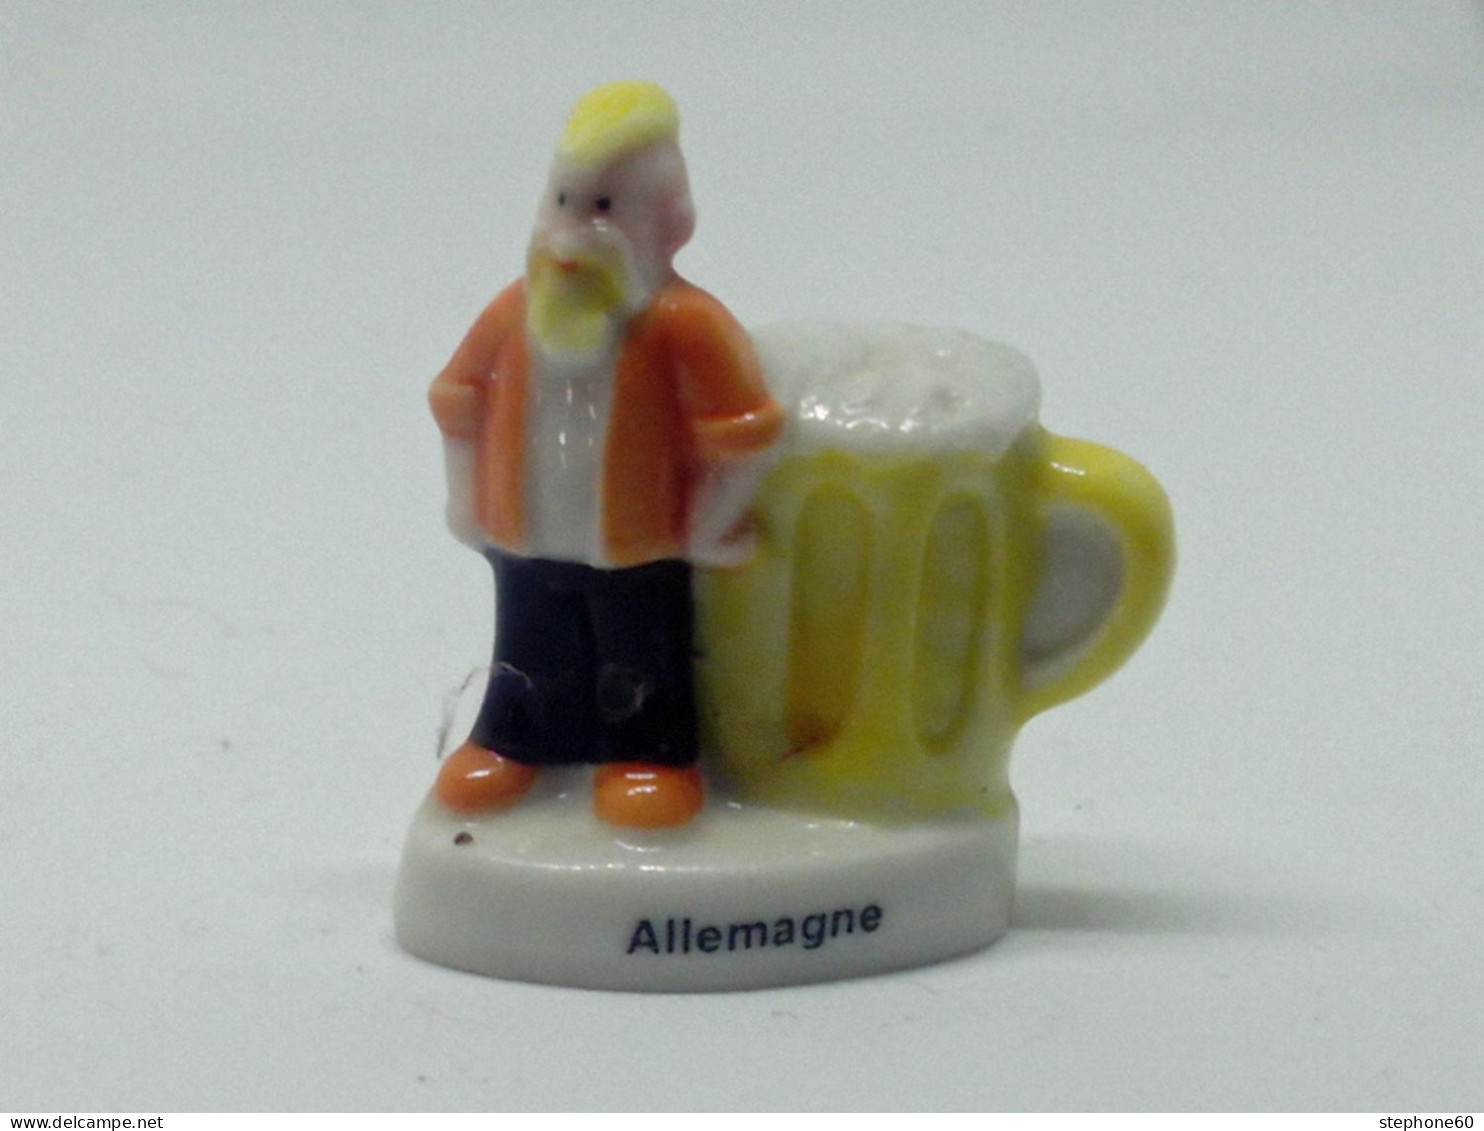 A002 - (60) Feve Pays Allemagne - Personnage - Pays